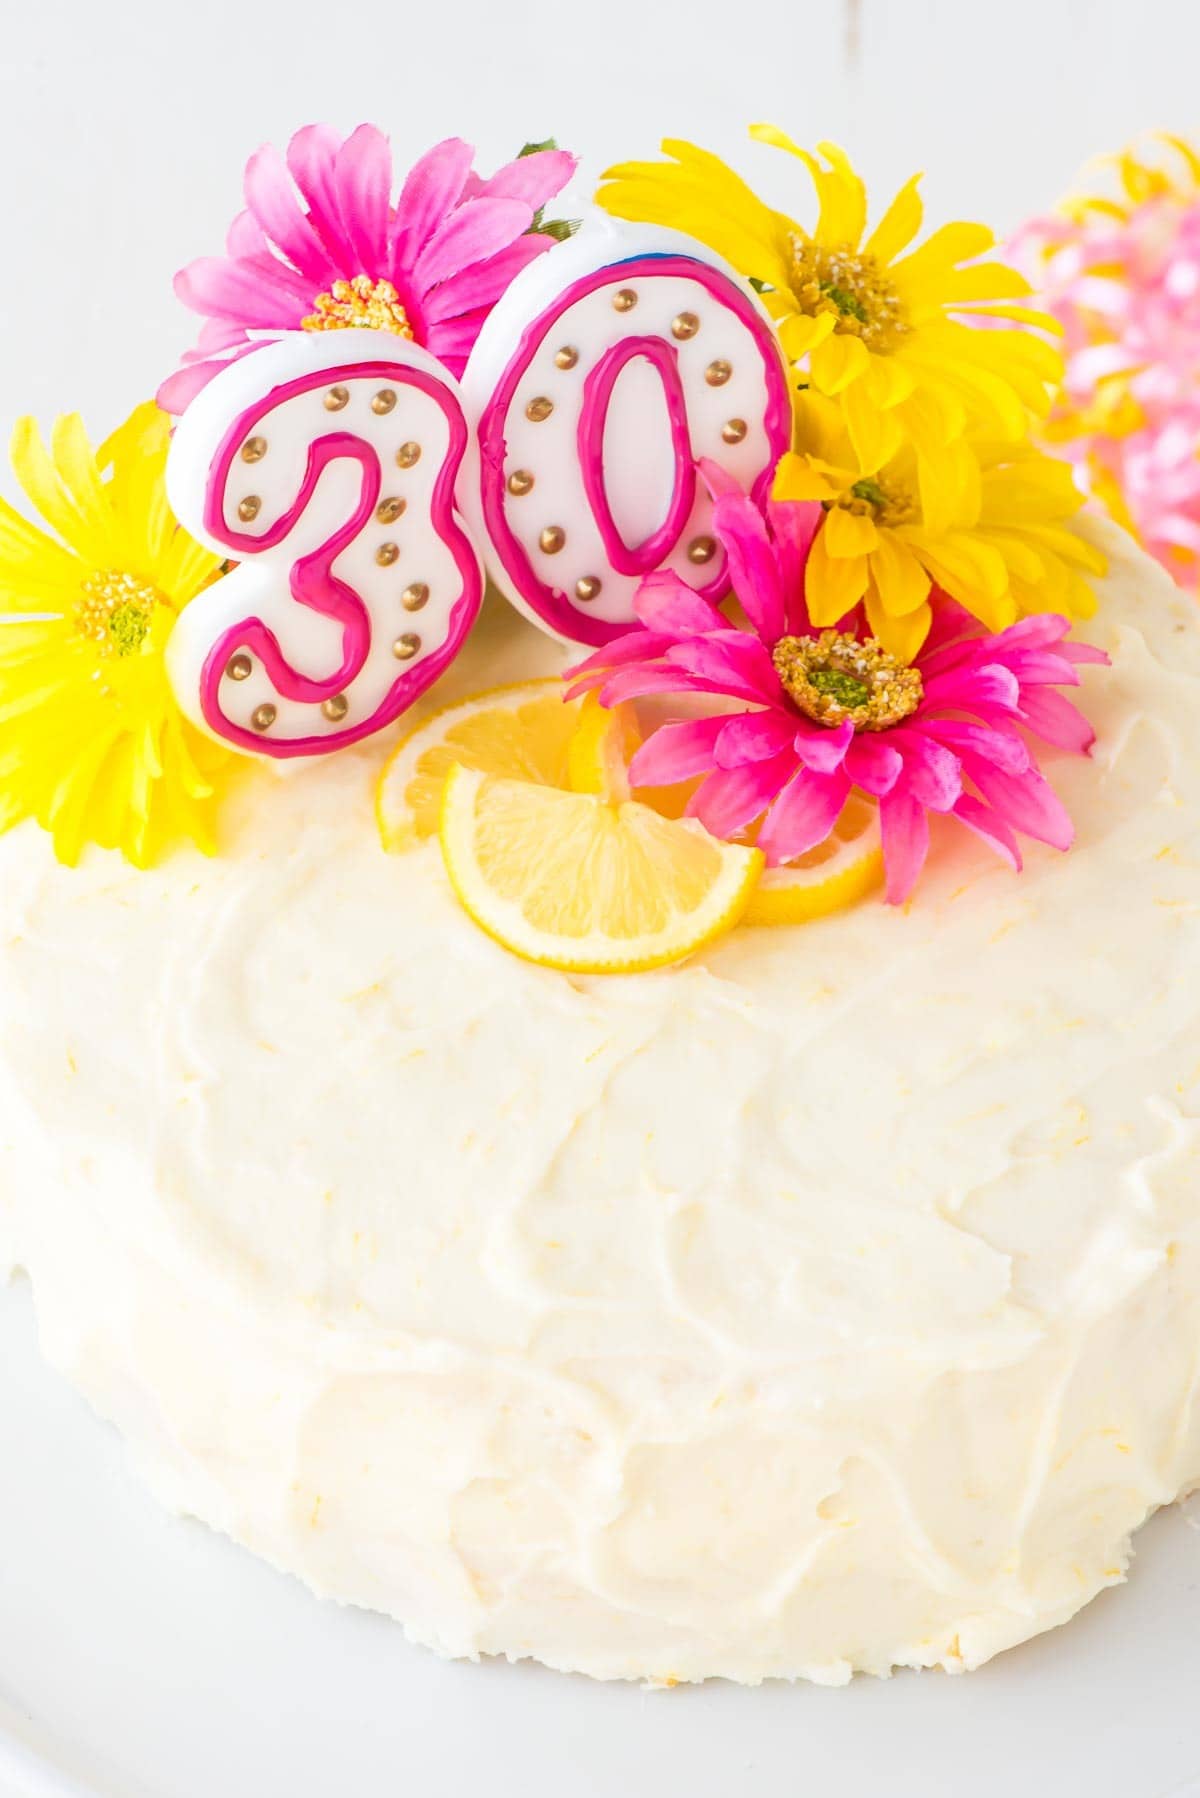 Healthy Lemon Cake topped with lemon cream cheese frosting, fresh spring flowers, and candles